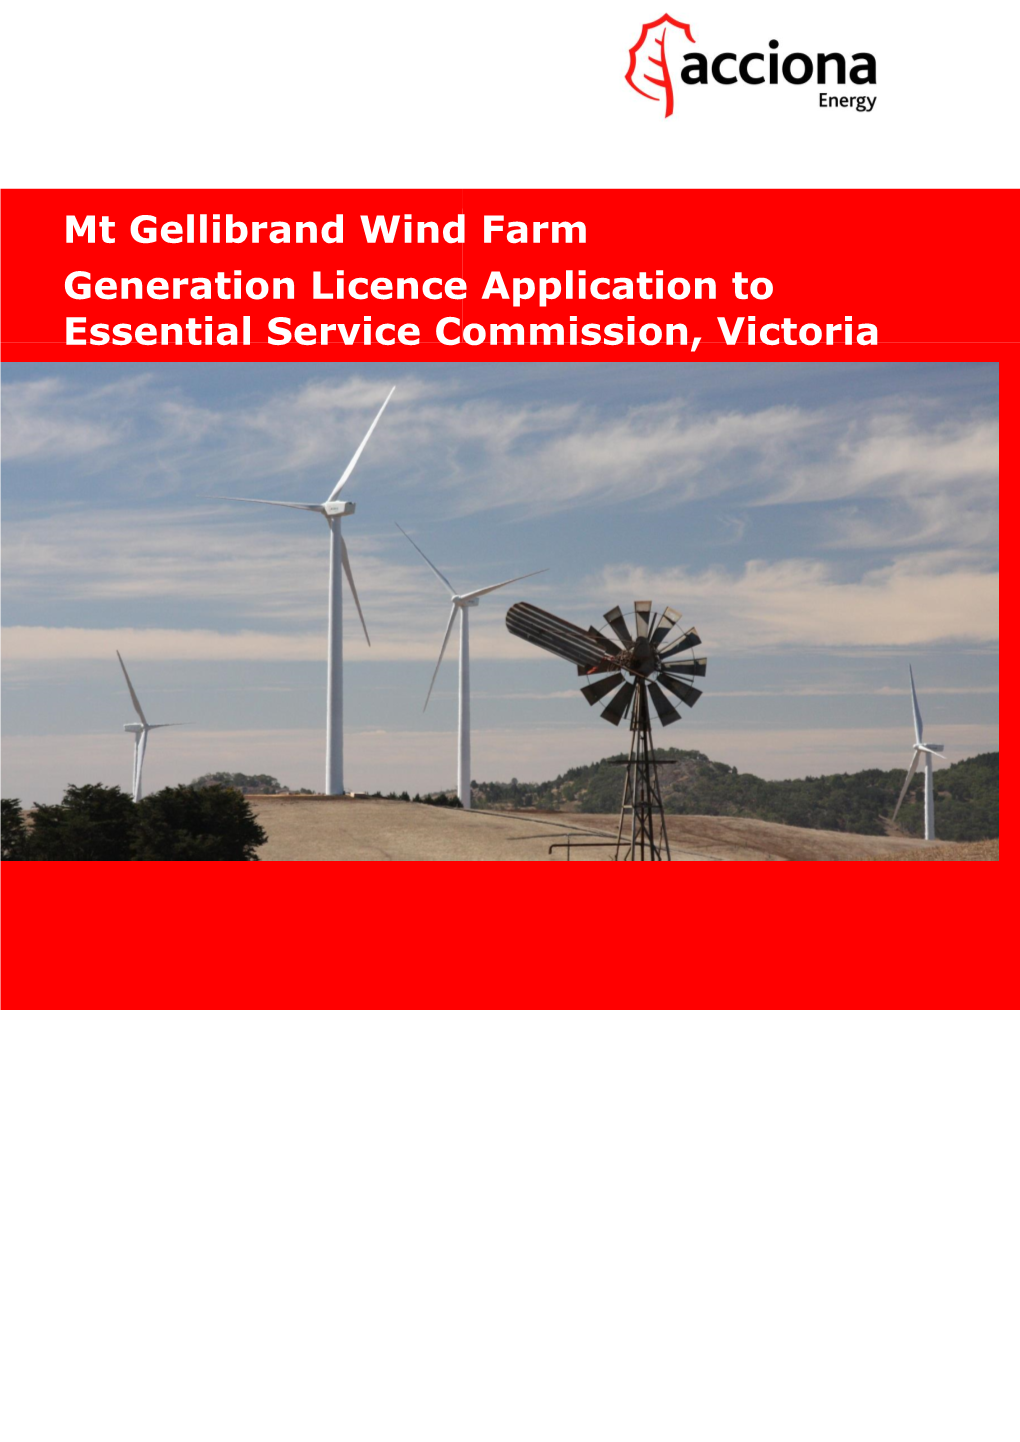 Mt Gellibrand Wind Farm Generation Licence Application to Essential Service Commission, Victoria